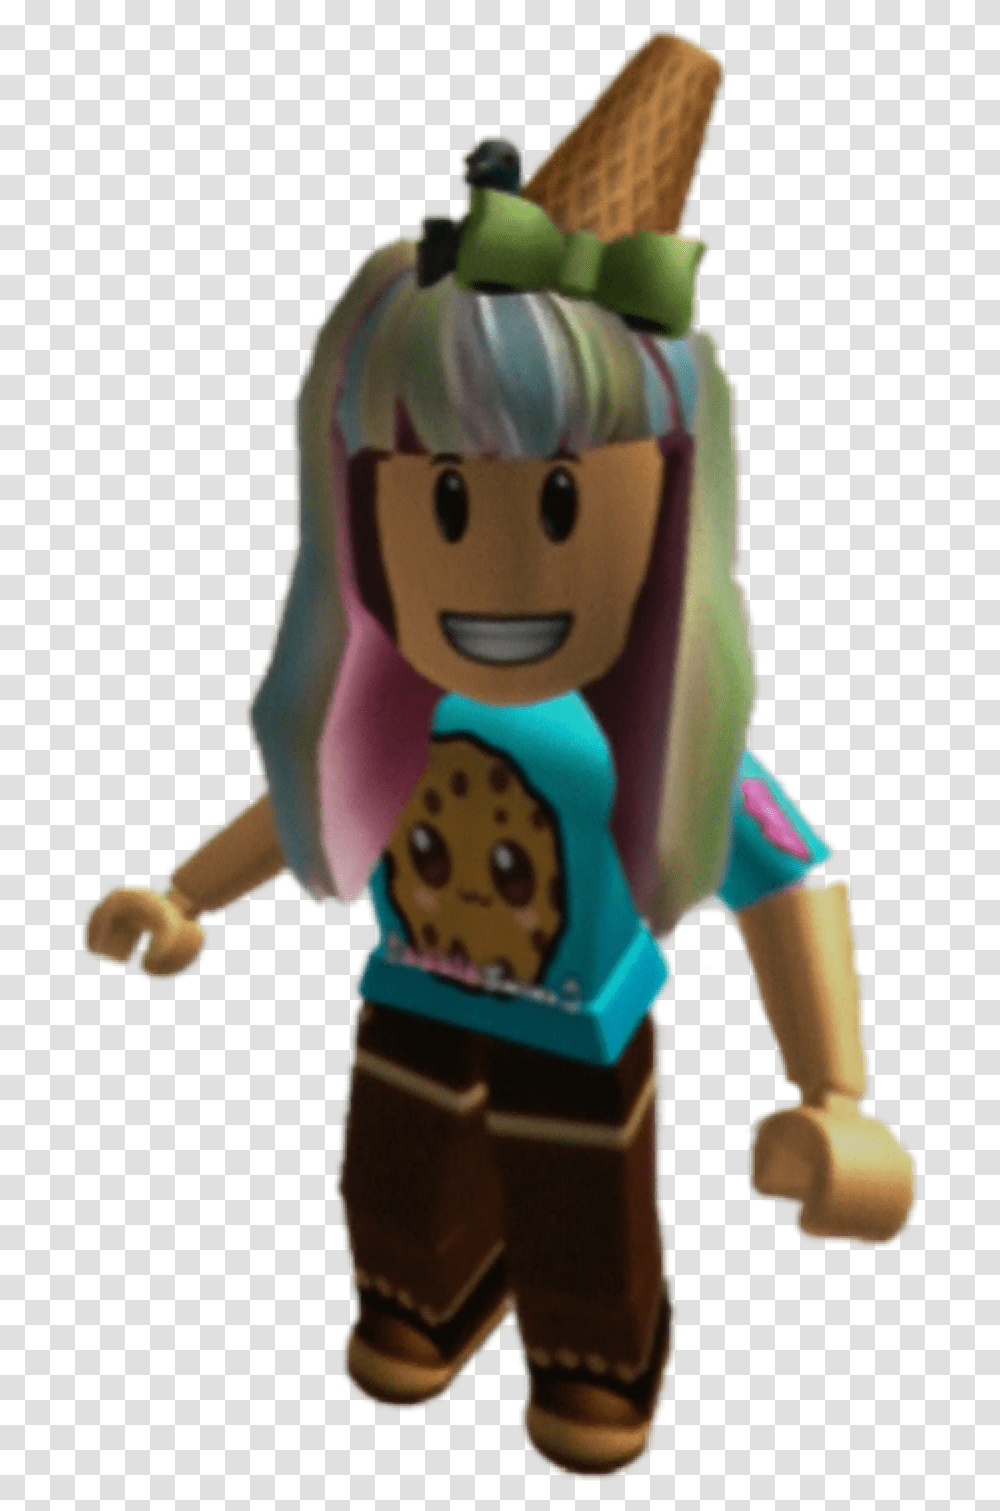 Roblox Girls Cookie Swirl C, Figurine, Toy, Doll Transparent Png